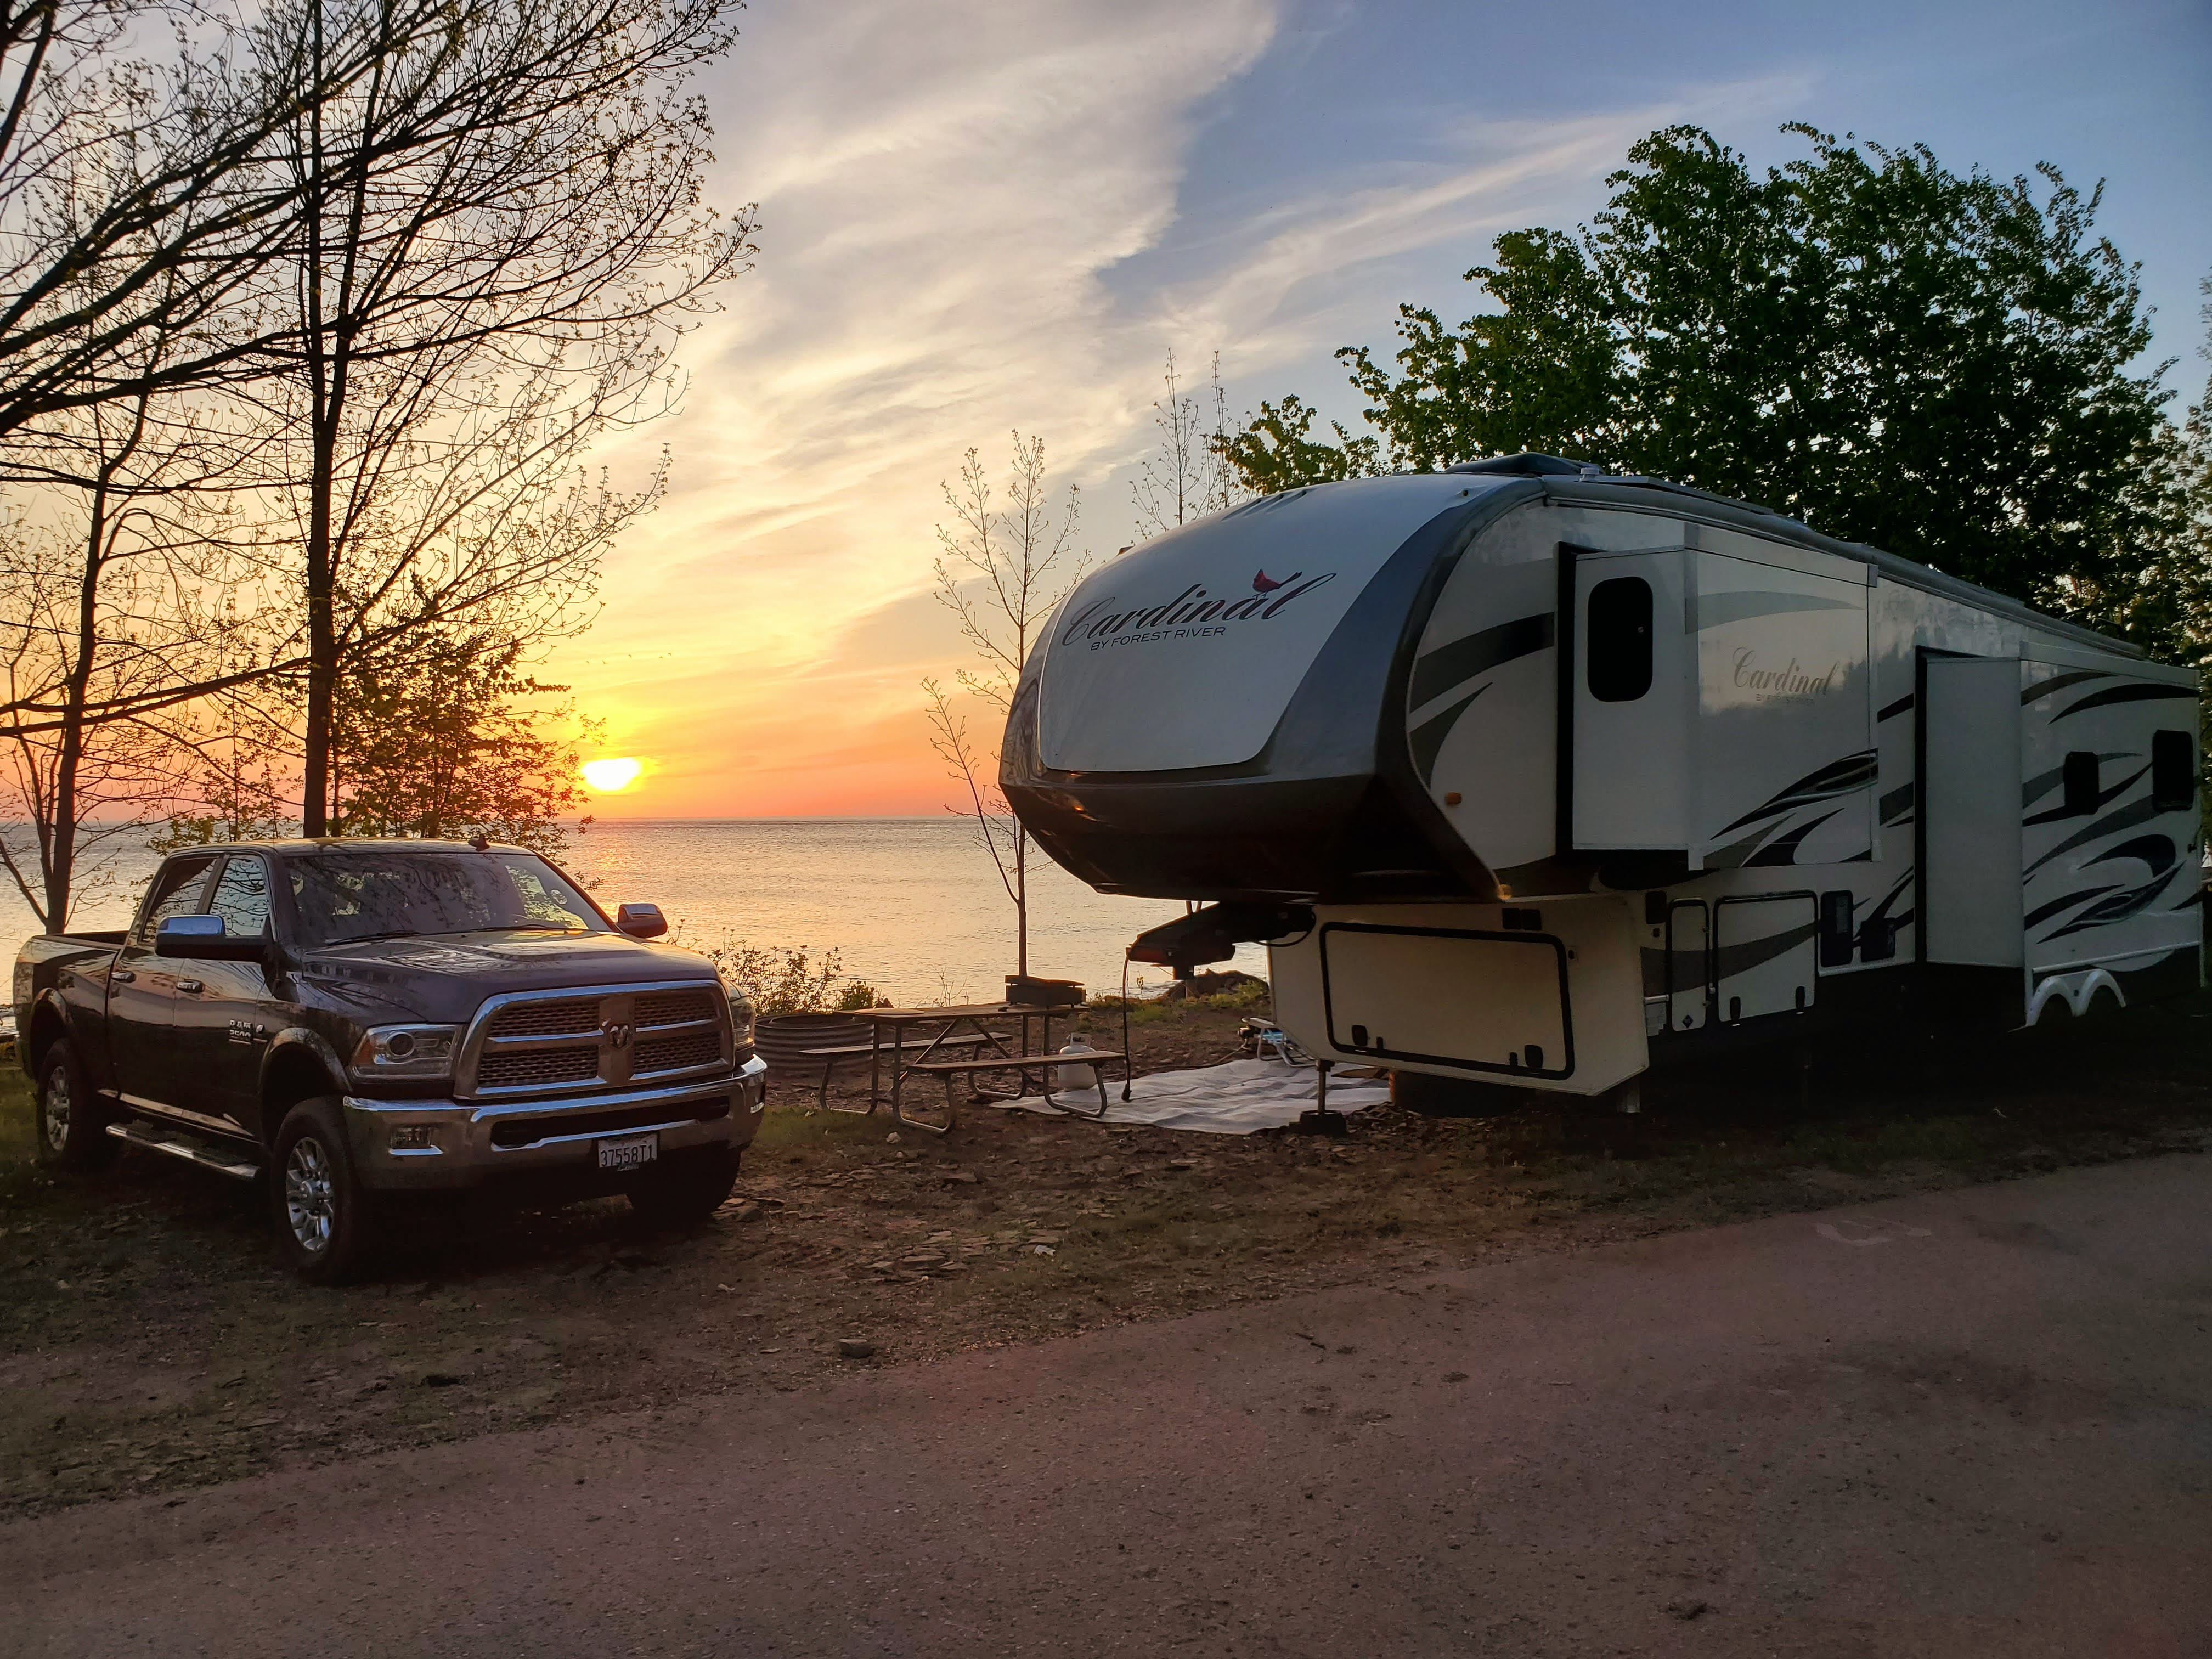 5th Wheel RV in Campsite at Union Bay Campground, Porcupine State Park